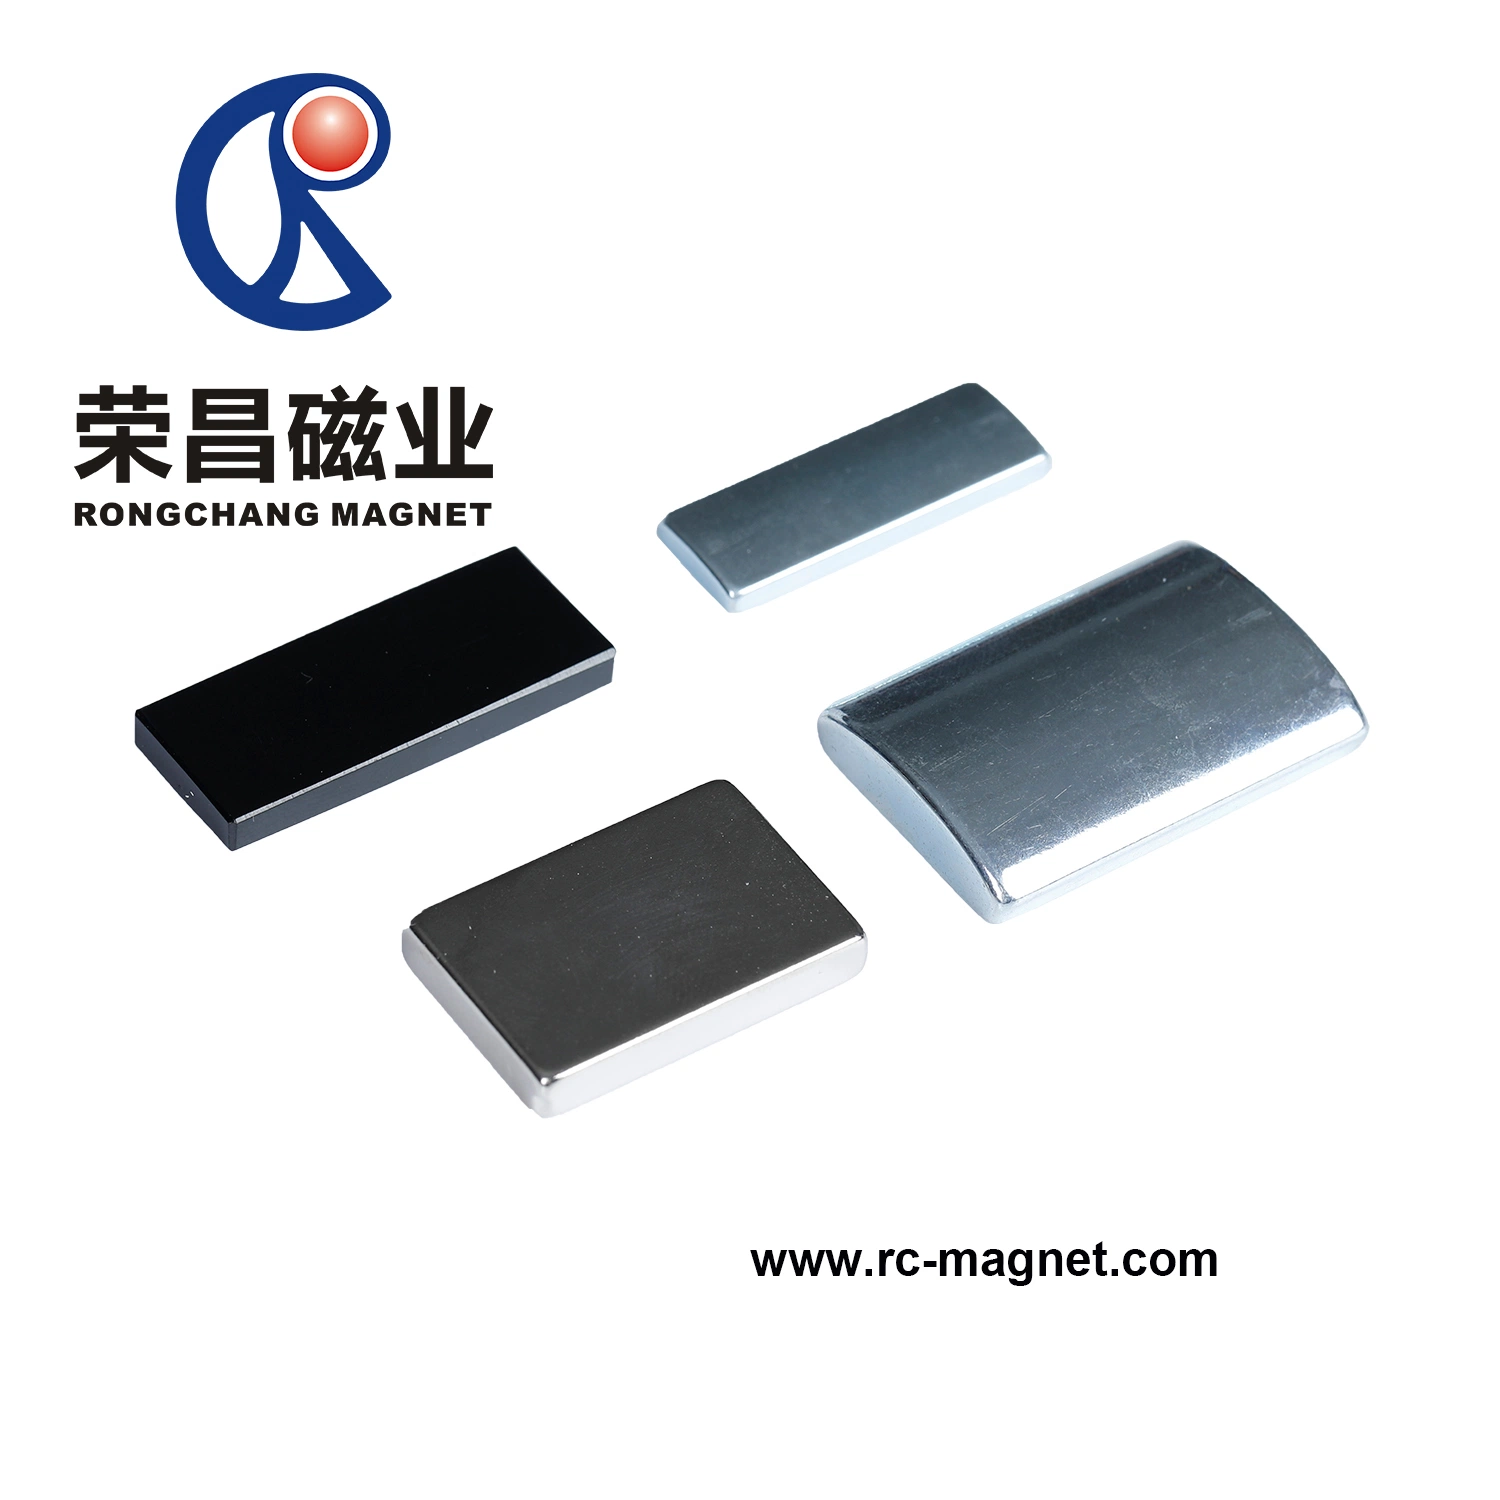 Professional Supplier of China Rare Earth Strong Neodymium NdFeB Permanent Magnet